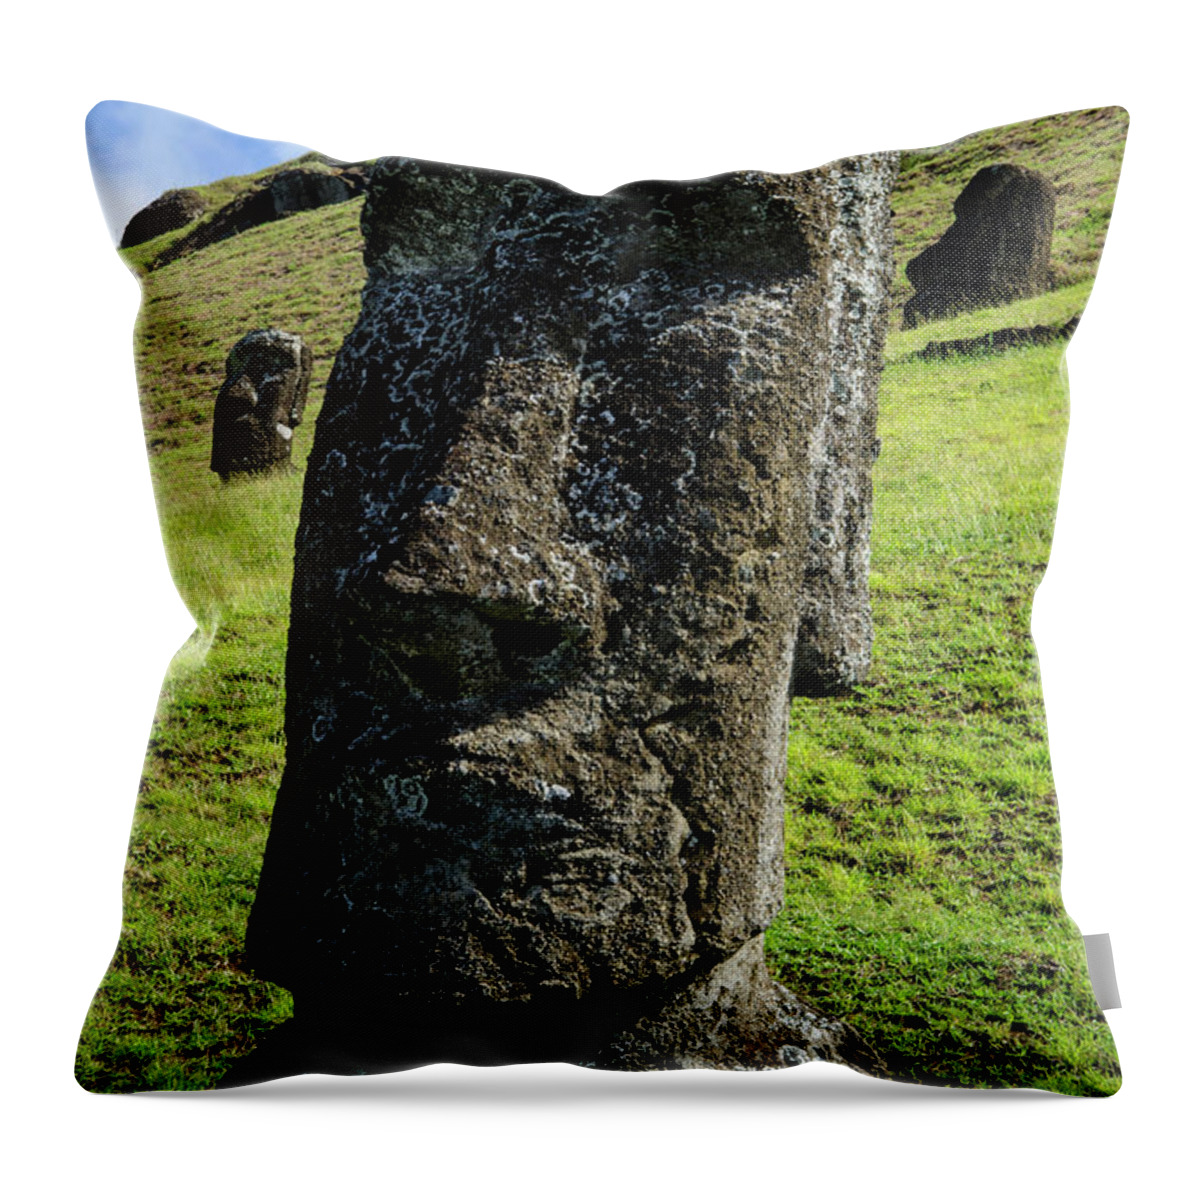 Easter Island Throw Pillow featuring the photograph Moai Rapa Nui 6 by Bob Christopher